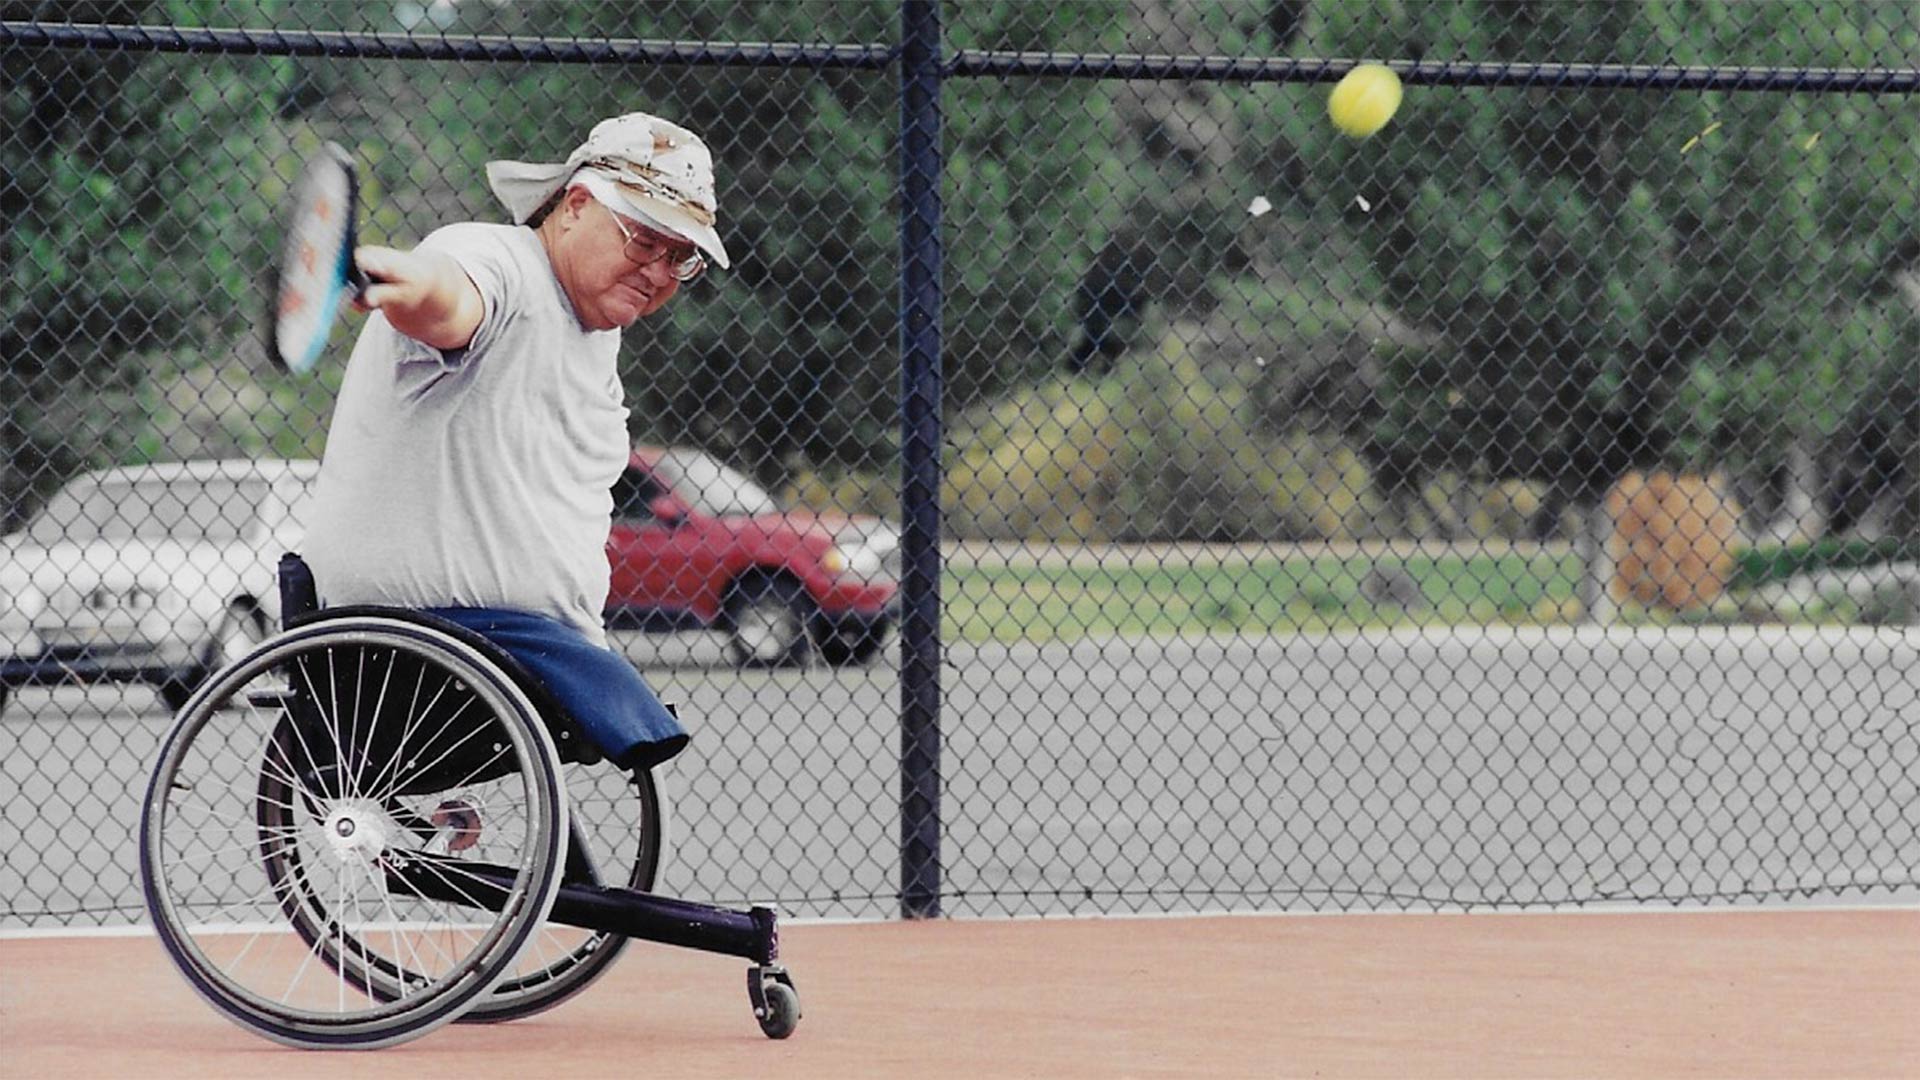 Former University of Arizona wheelchair basketball player and founder Rudy Gallego plays tennis.